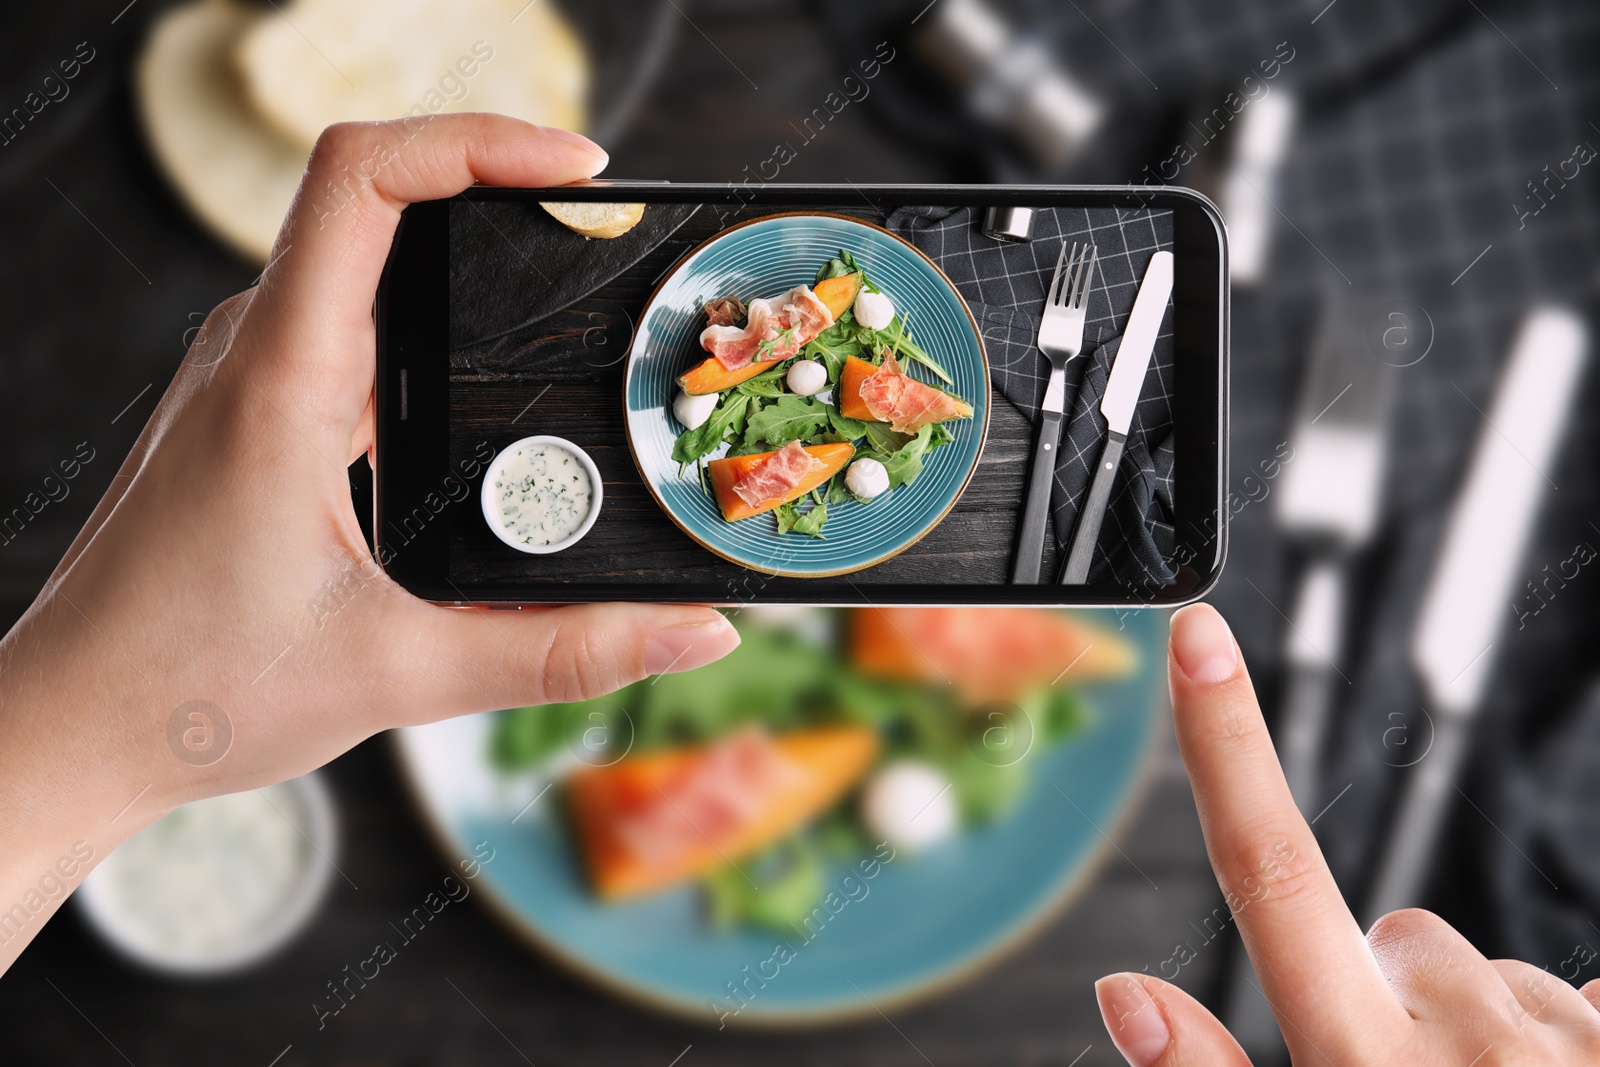 Image of Blogger taking picture of fresh melon with prosciutto at table, closeup. Food photography